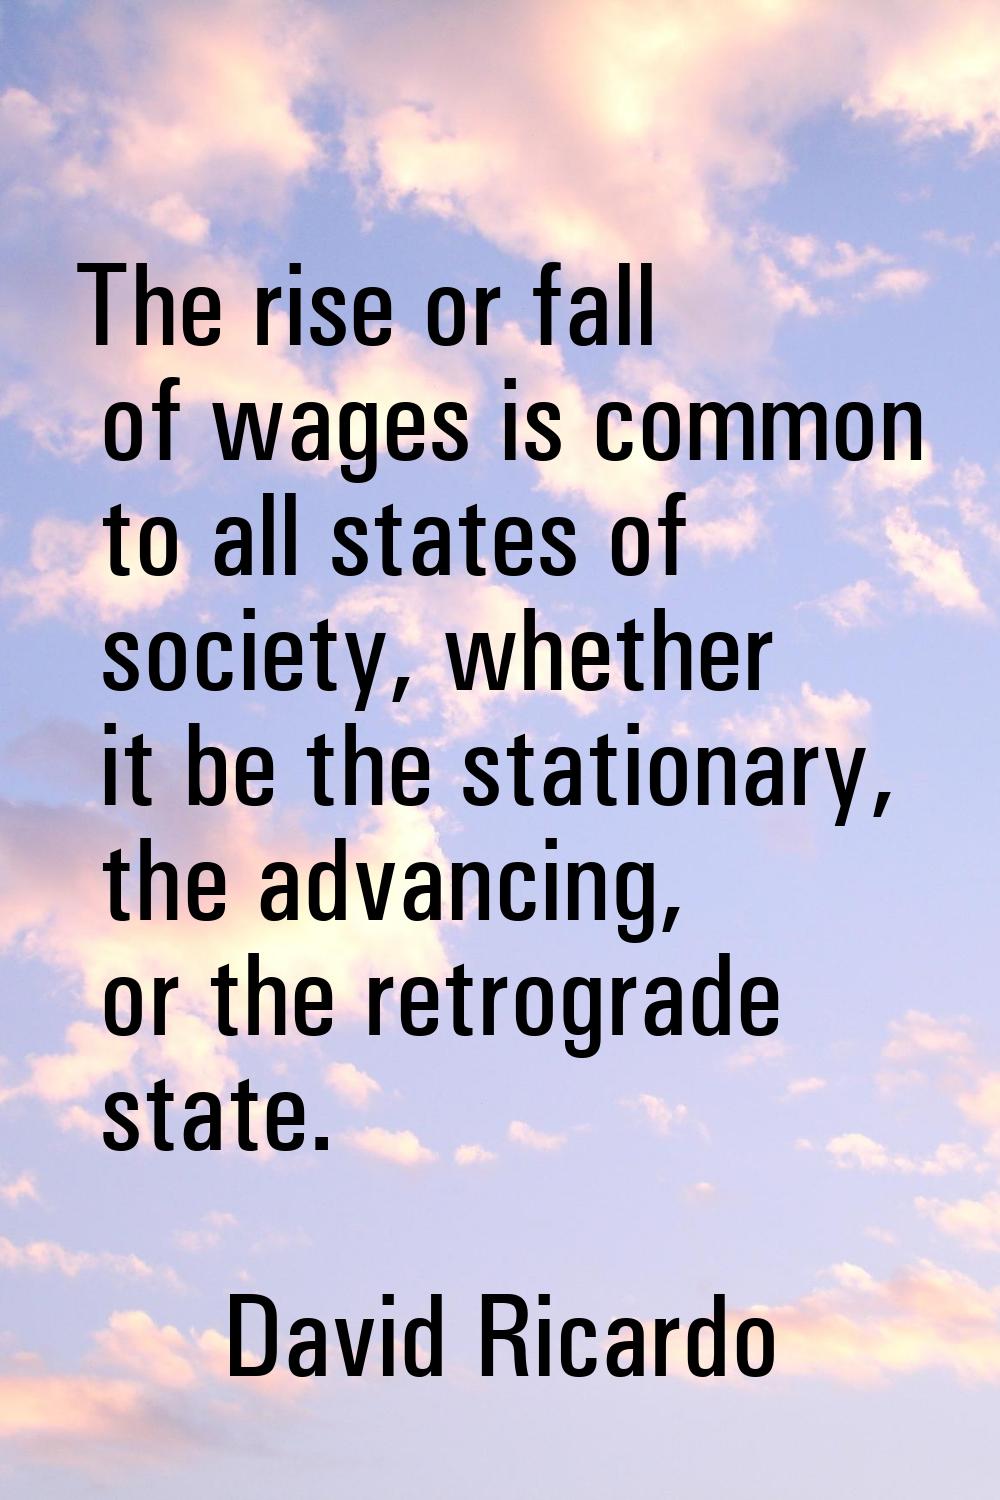 The rise or fall of wages is common to all states of society, whether it be the stationary, the adv